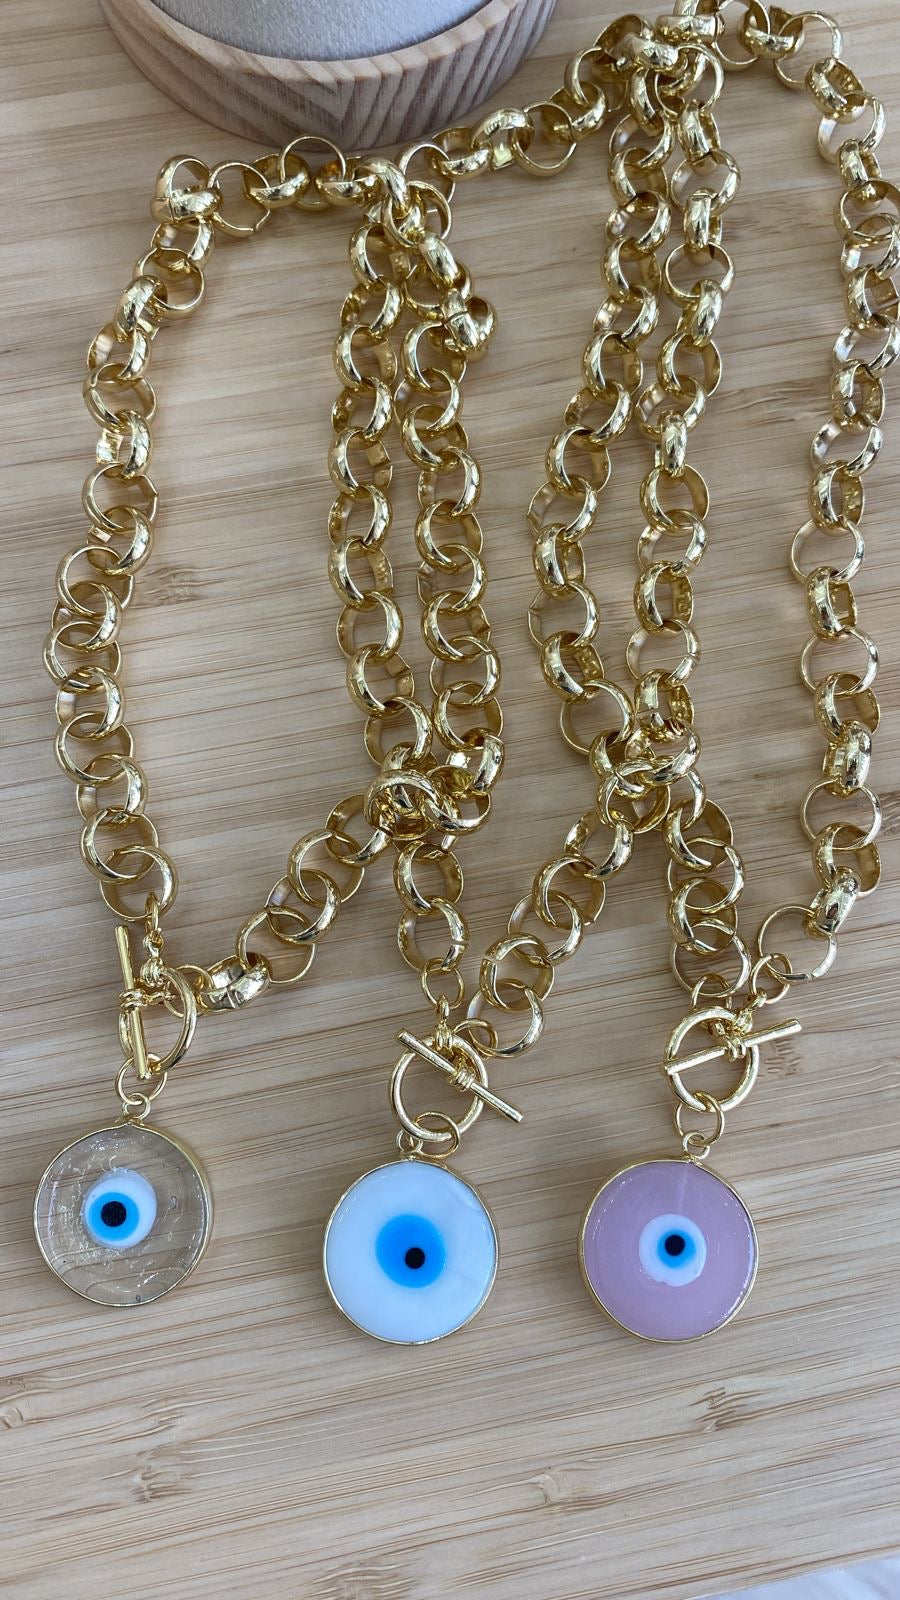 EYE CHAIN NECKLACE